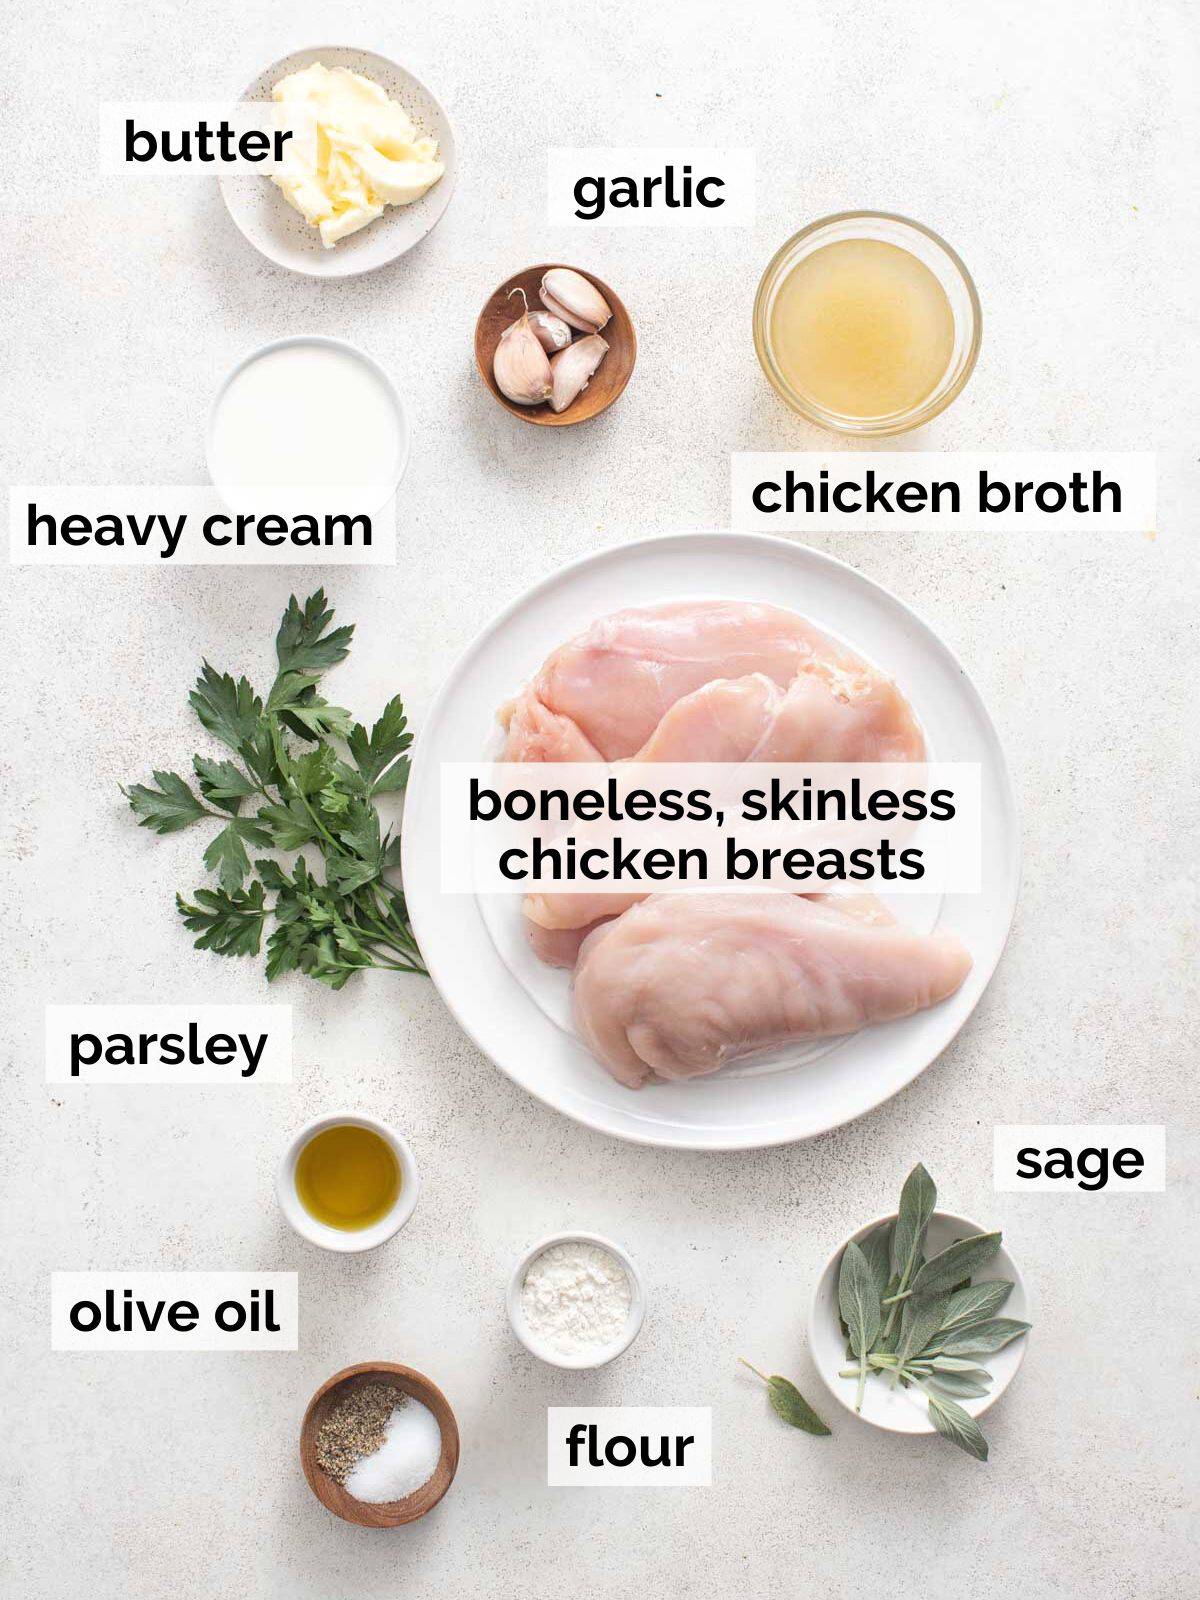 Ingredients for sage chicken on a white background.